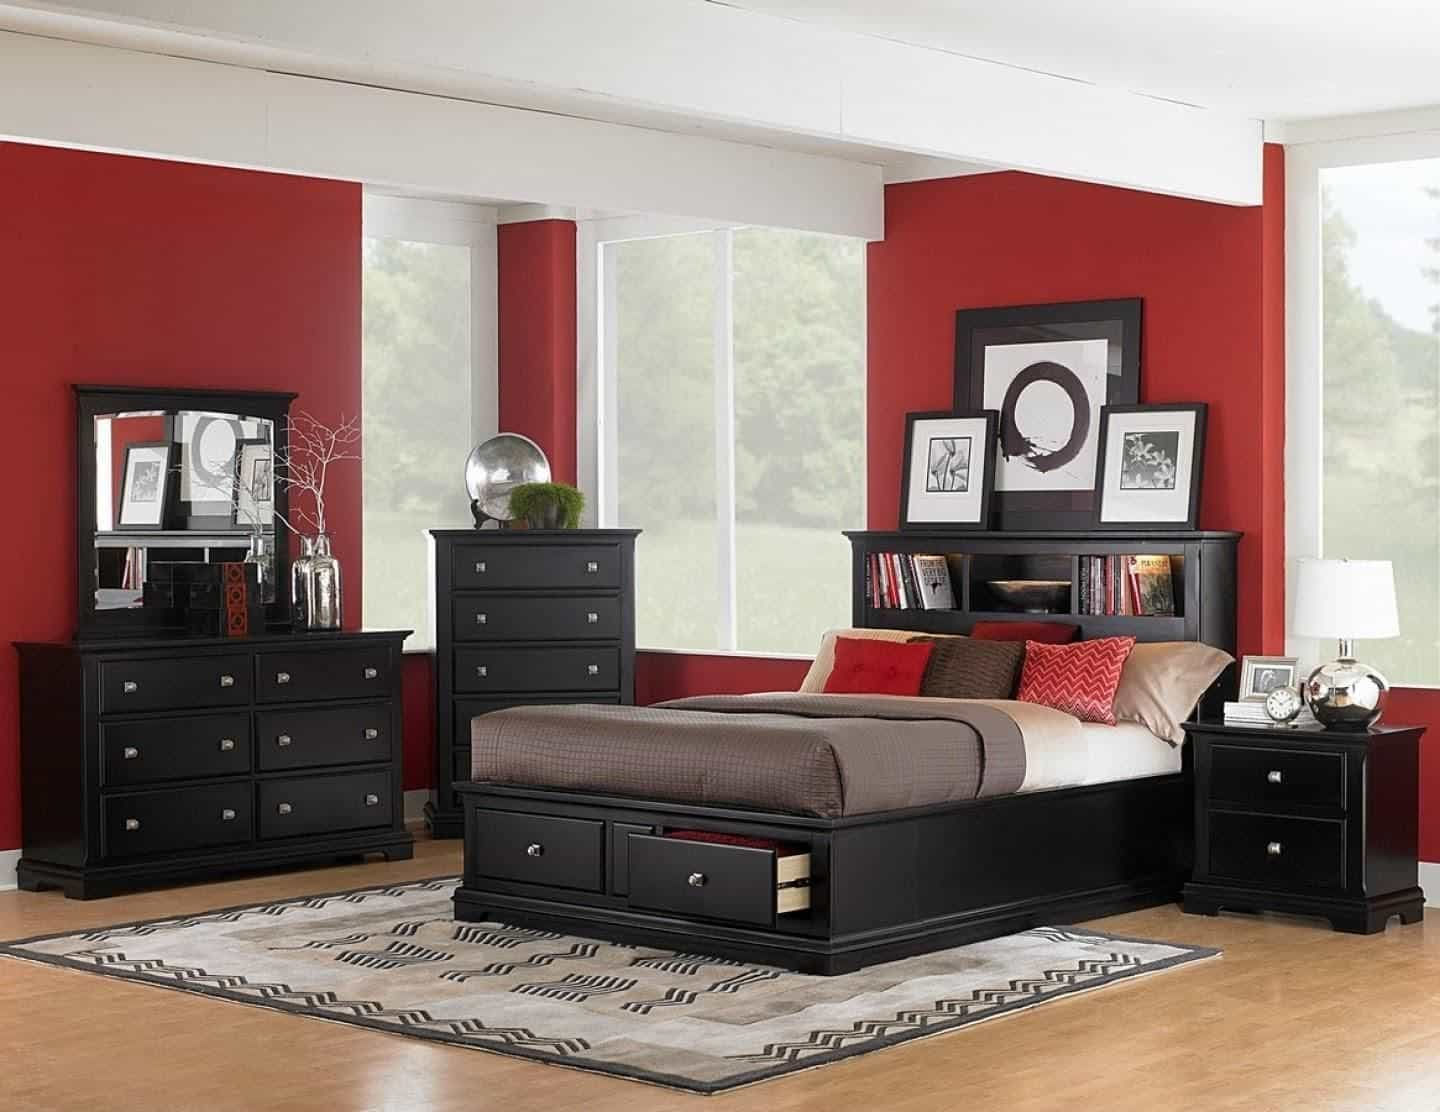 Good Wall Colors For Bedroom With Dark Furniture Perfect Wall in size 1440 X 1112